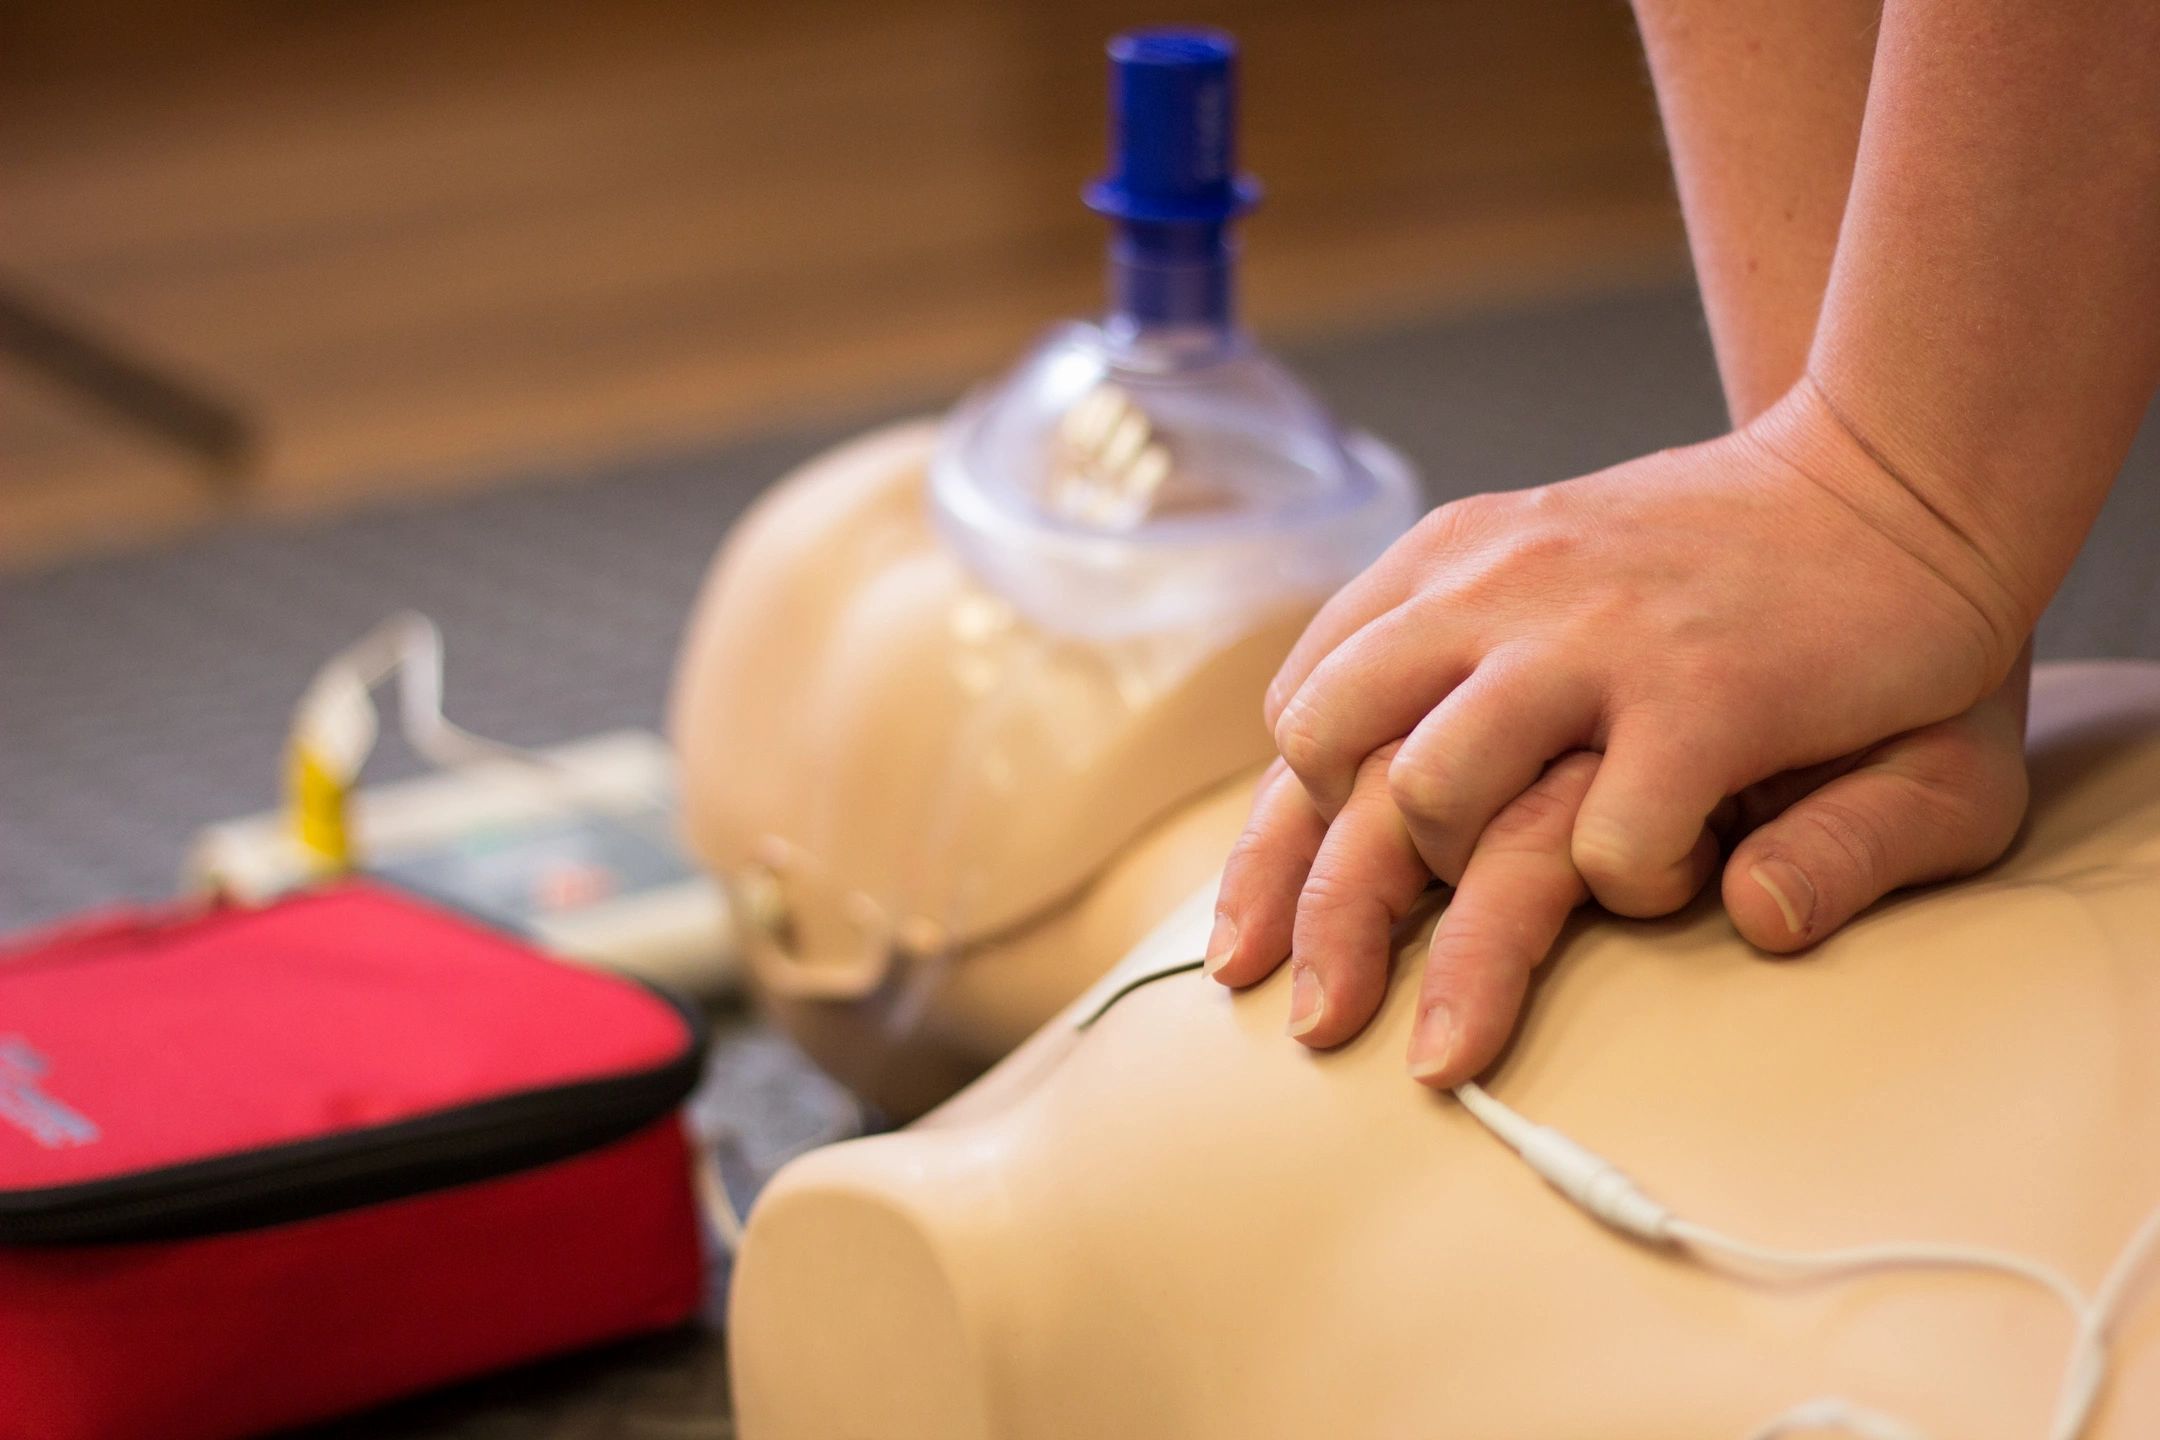 American Heart Association BLS Provider Course MontCo CPR Training